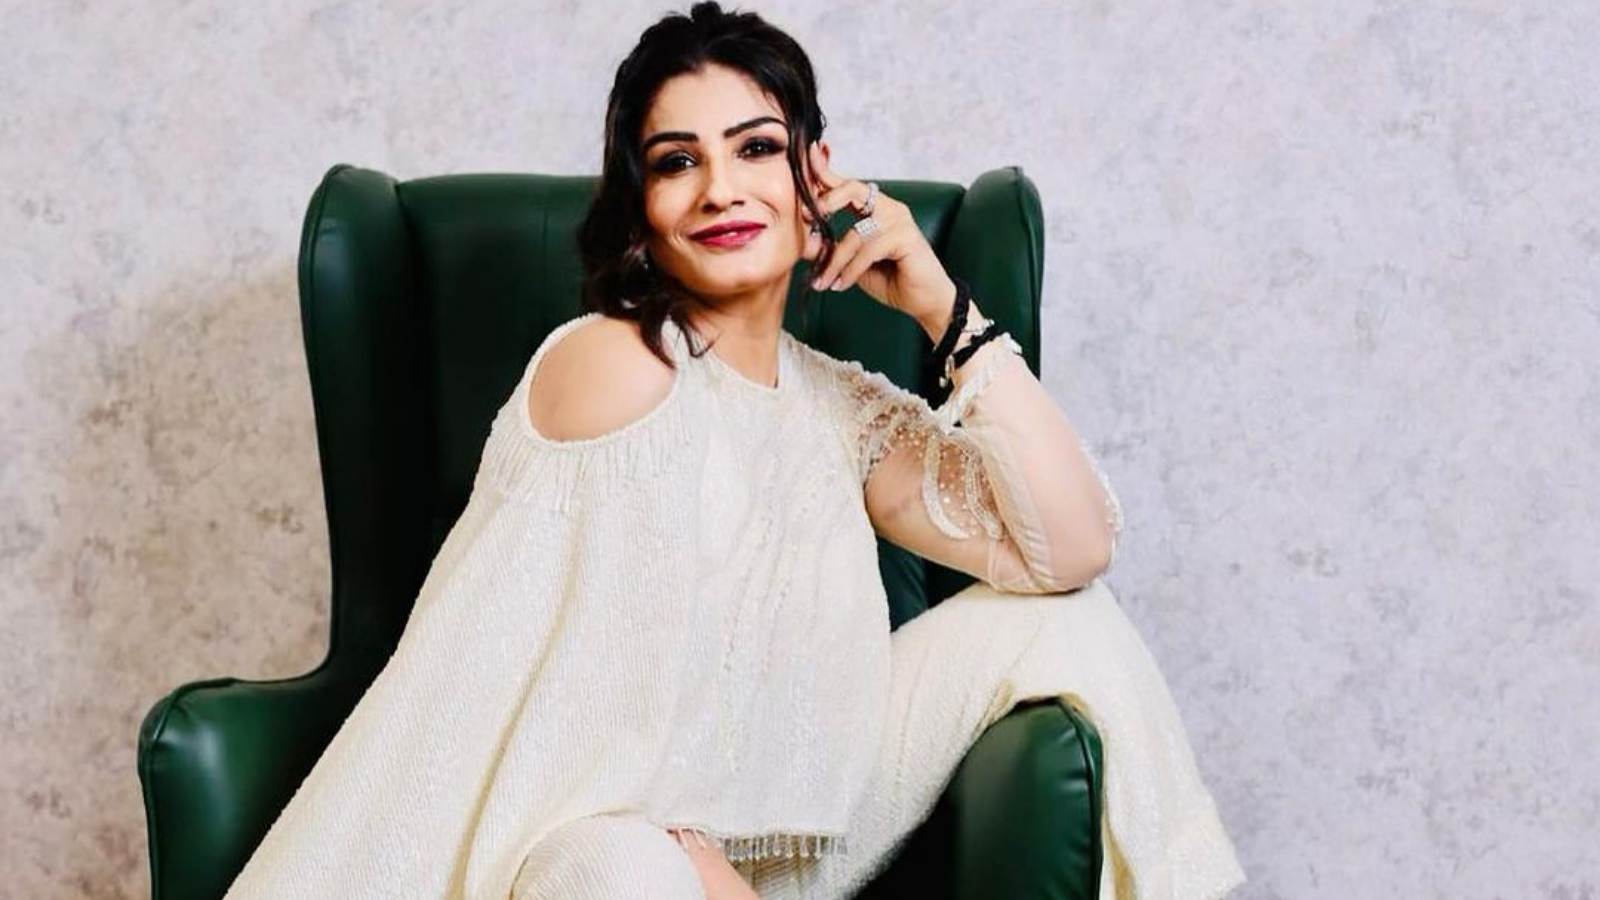 Ravina Tantan Sex Video - Raveena Tandon says South film industry doesn't make 'elitist' films while  Hindi movies have become 'westernised': 'They have started making DVD  copiesâ€¦' | Bollywood News - The Indian Express